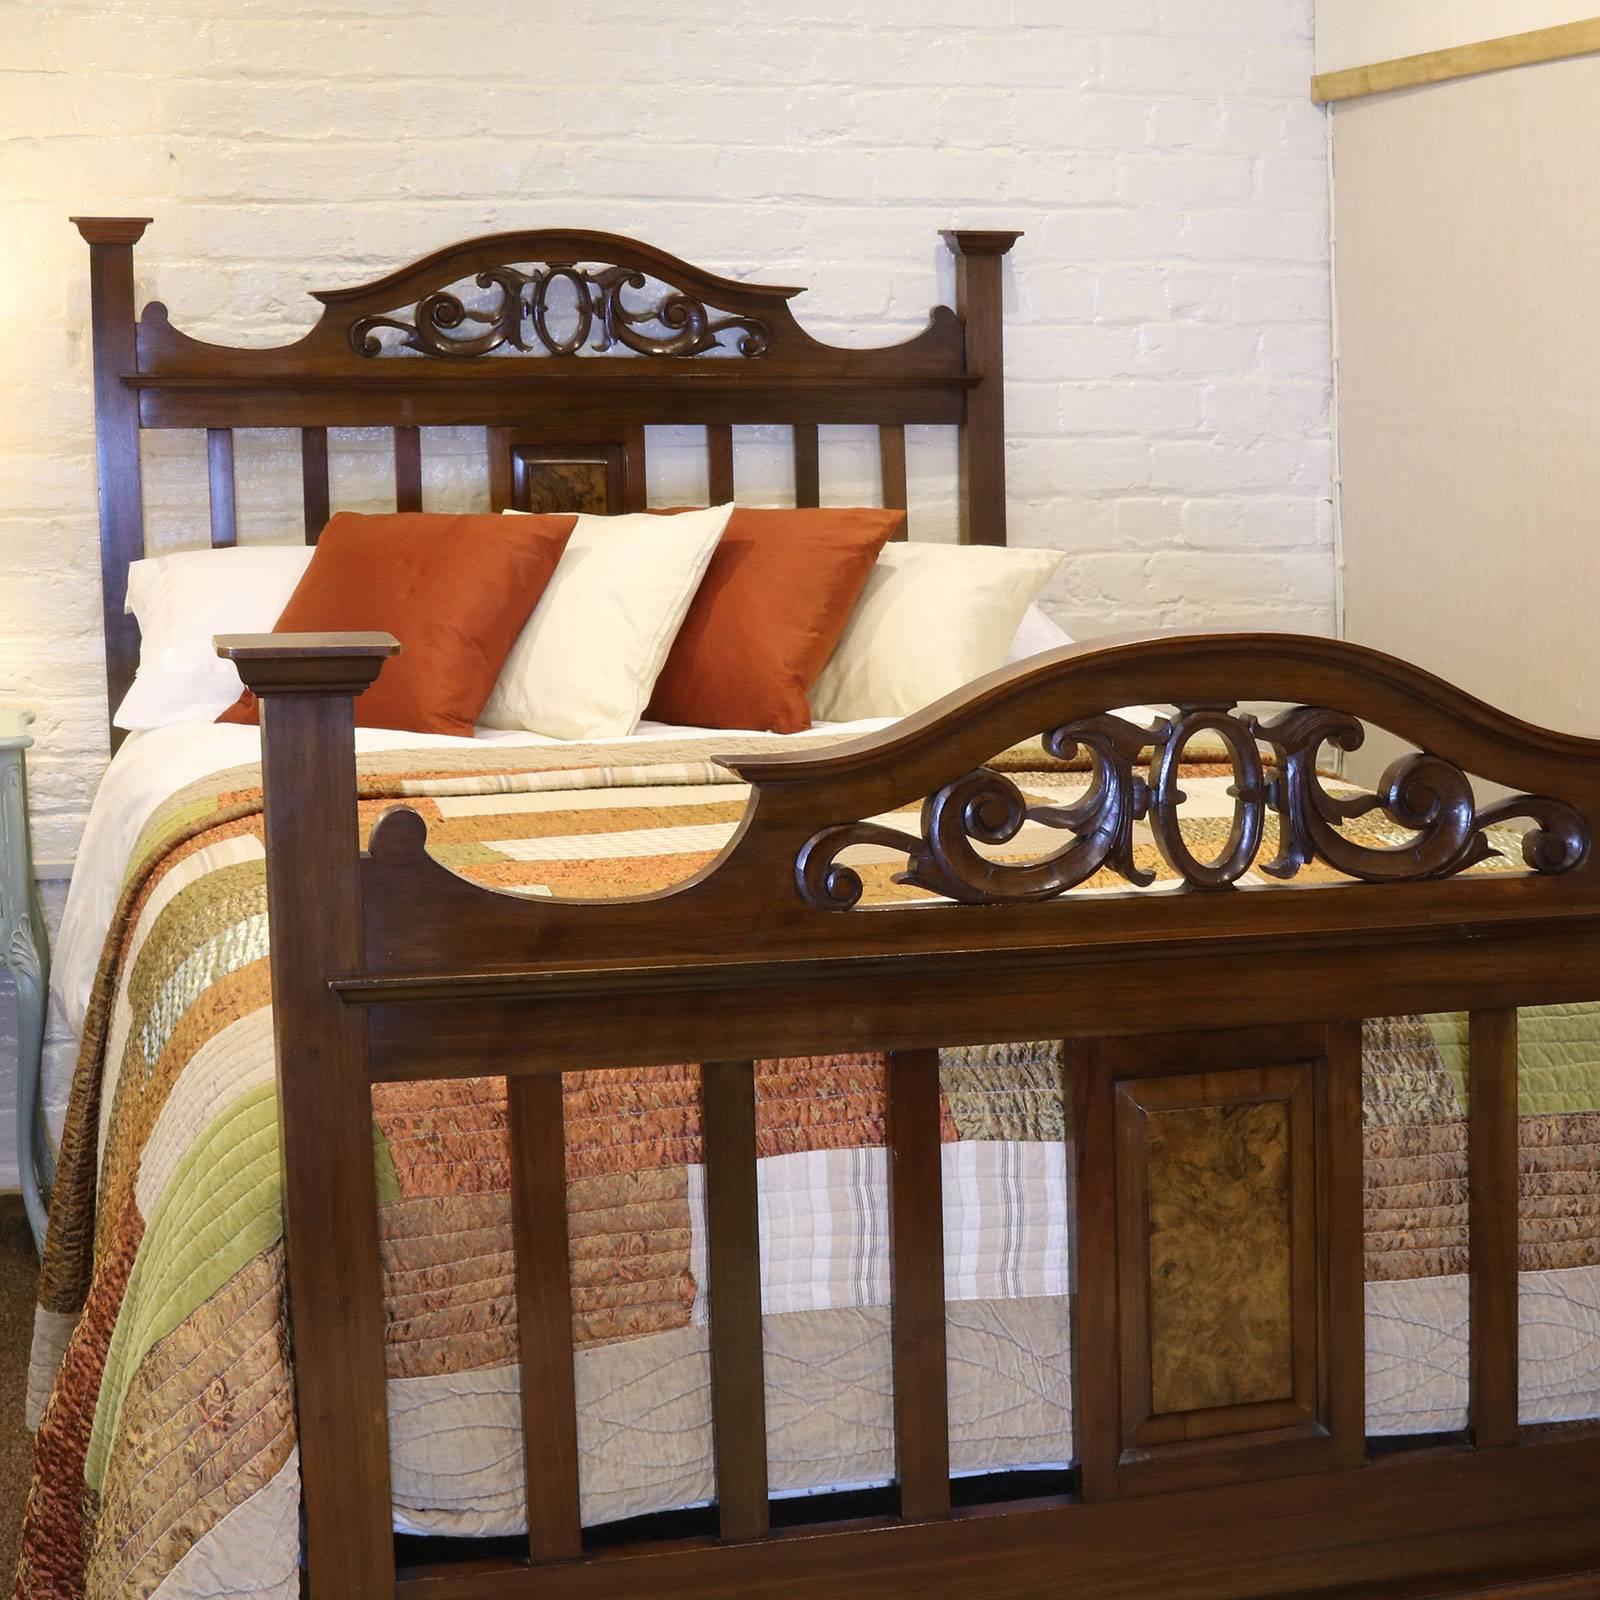 A mahogany bed in the arts and crafts style.

This bed accepts a standard double 4ft 6in wide (54 inches) base and mattress set.

The price is for the bed alone. The base, mattress, bedding and linen are extra and supplied by Seventh Heaven.